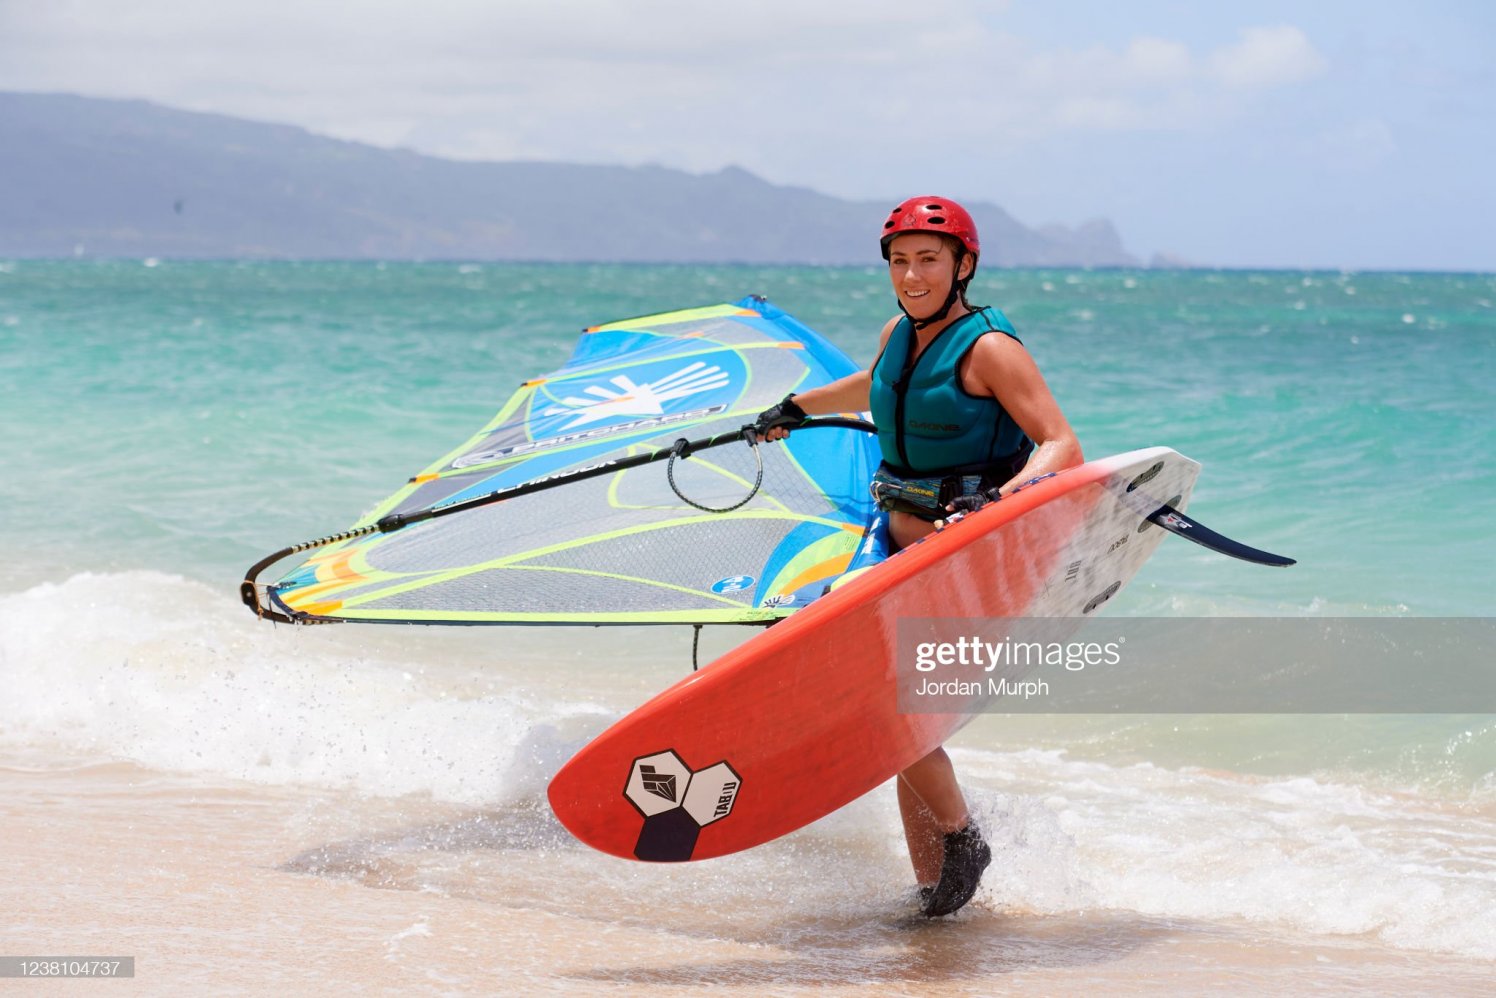 gettyimages-1238104737-2048x2048.jpg